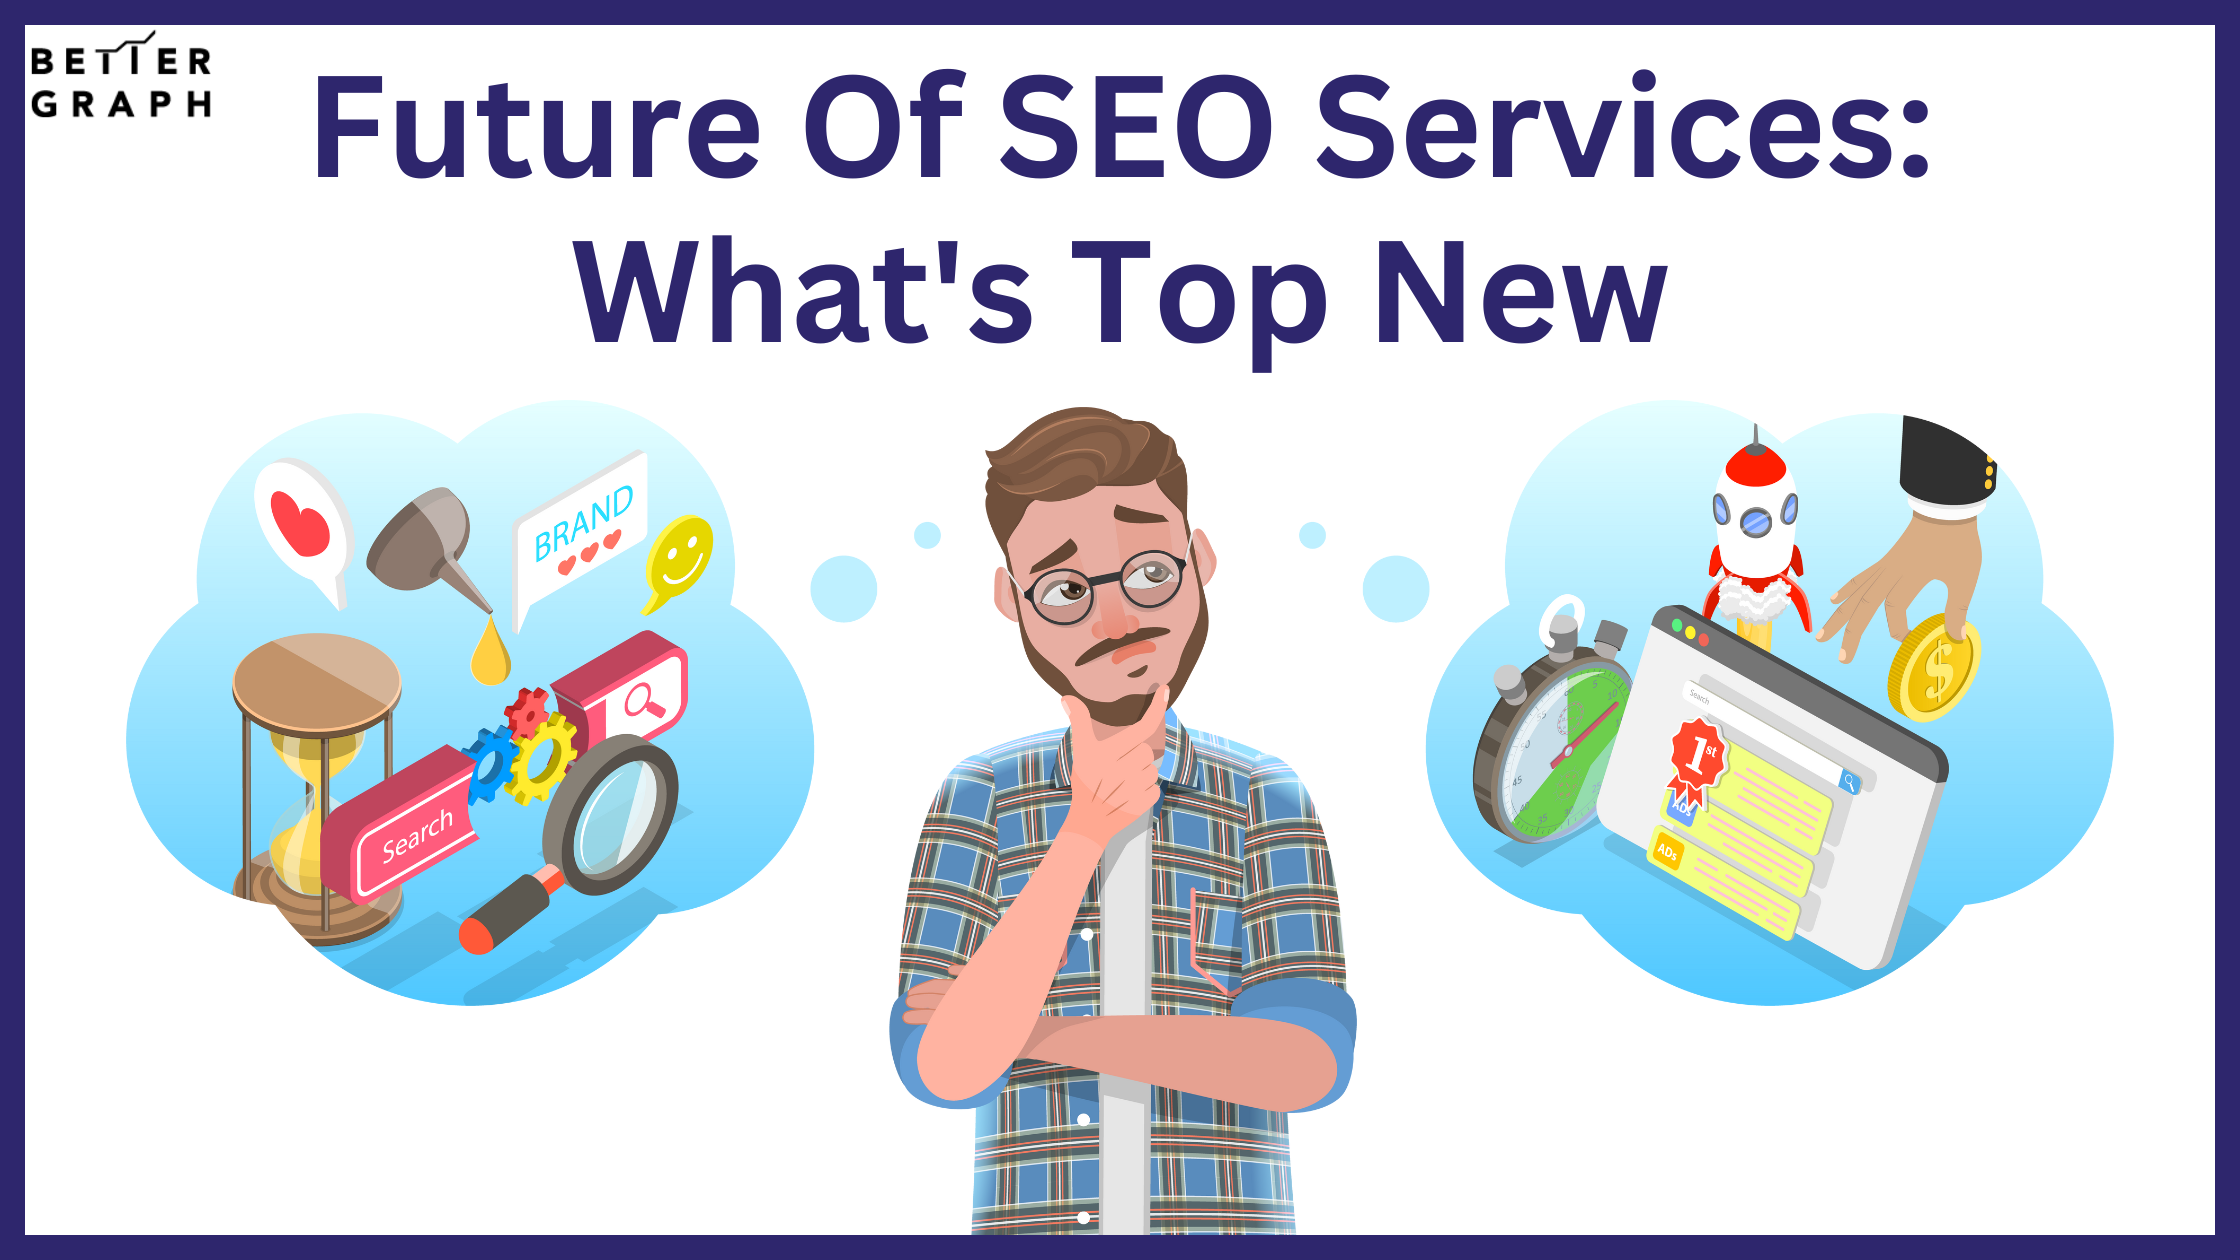 Future Of SEO Services What's Top New (1).png  by BetterGraph